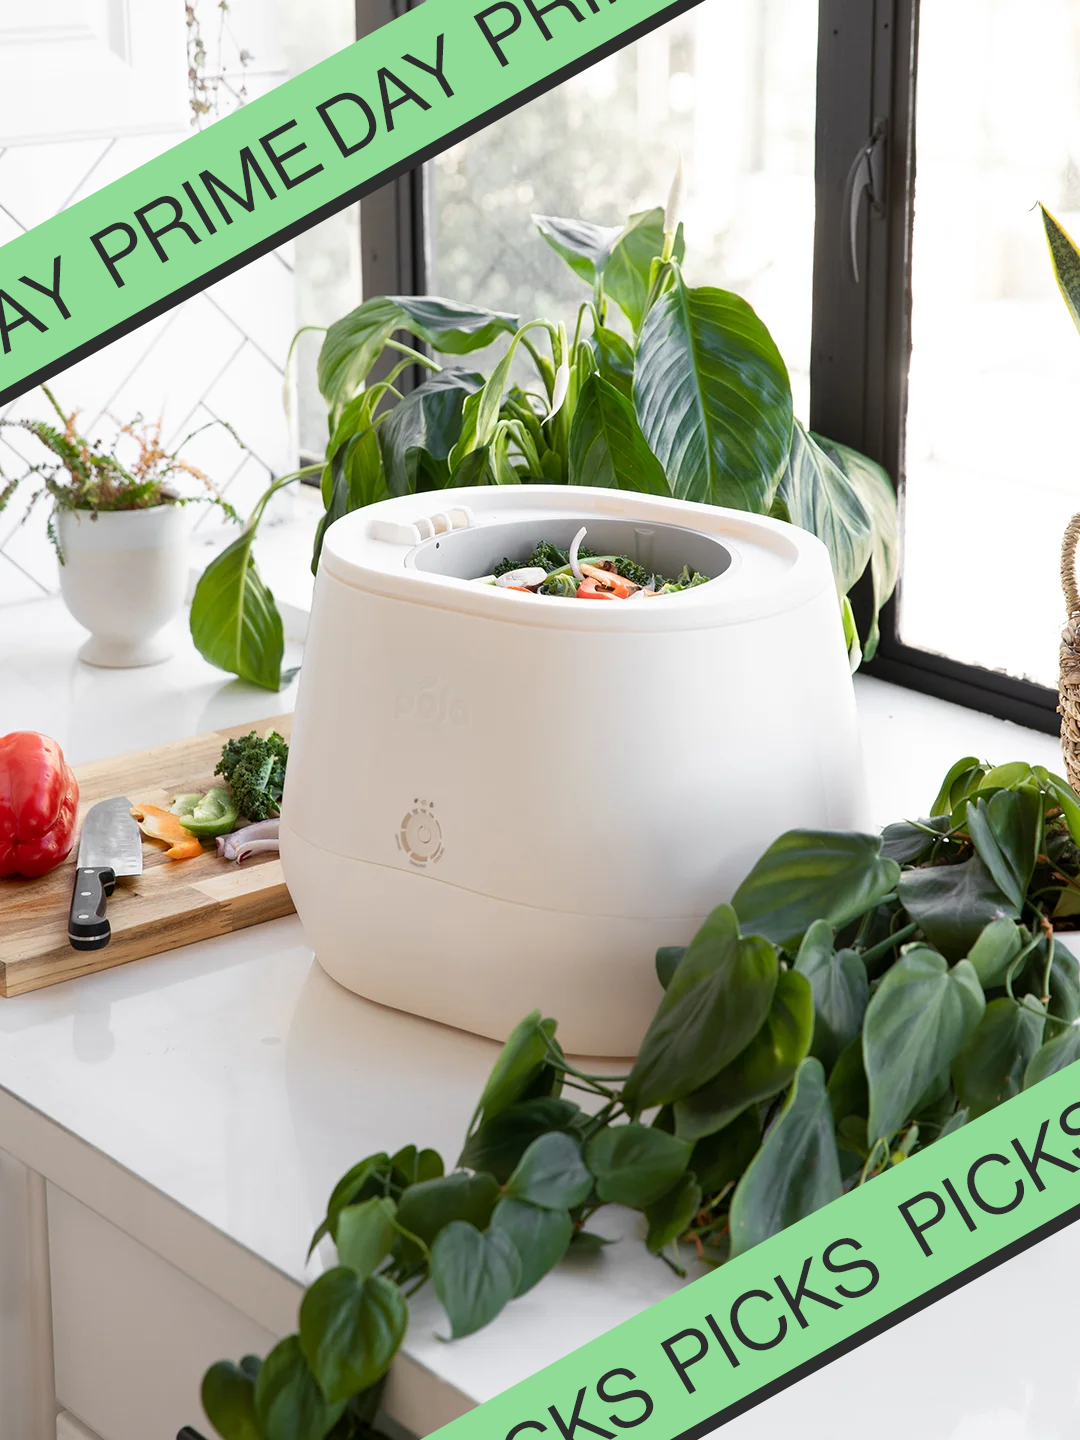 pela lomi compost maker with Prime Day banner